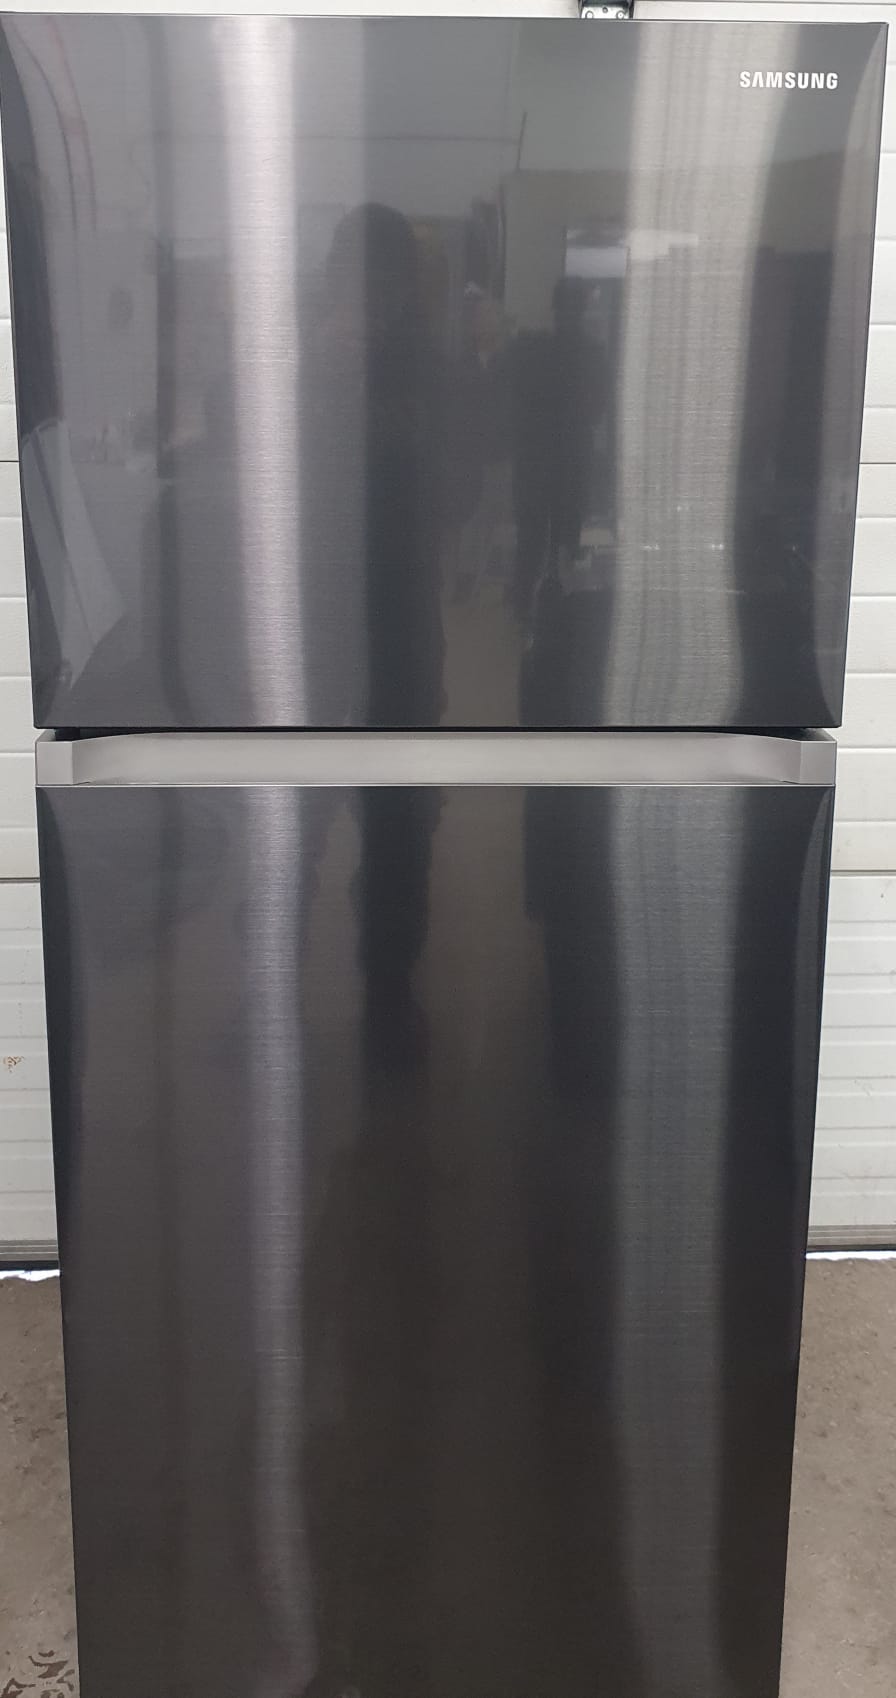 Order Your Used Less Than 1 Year Refrigerator Samsung RT18M6213SG Today!